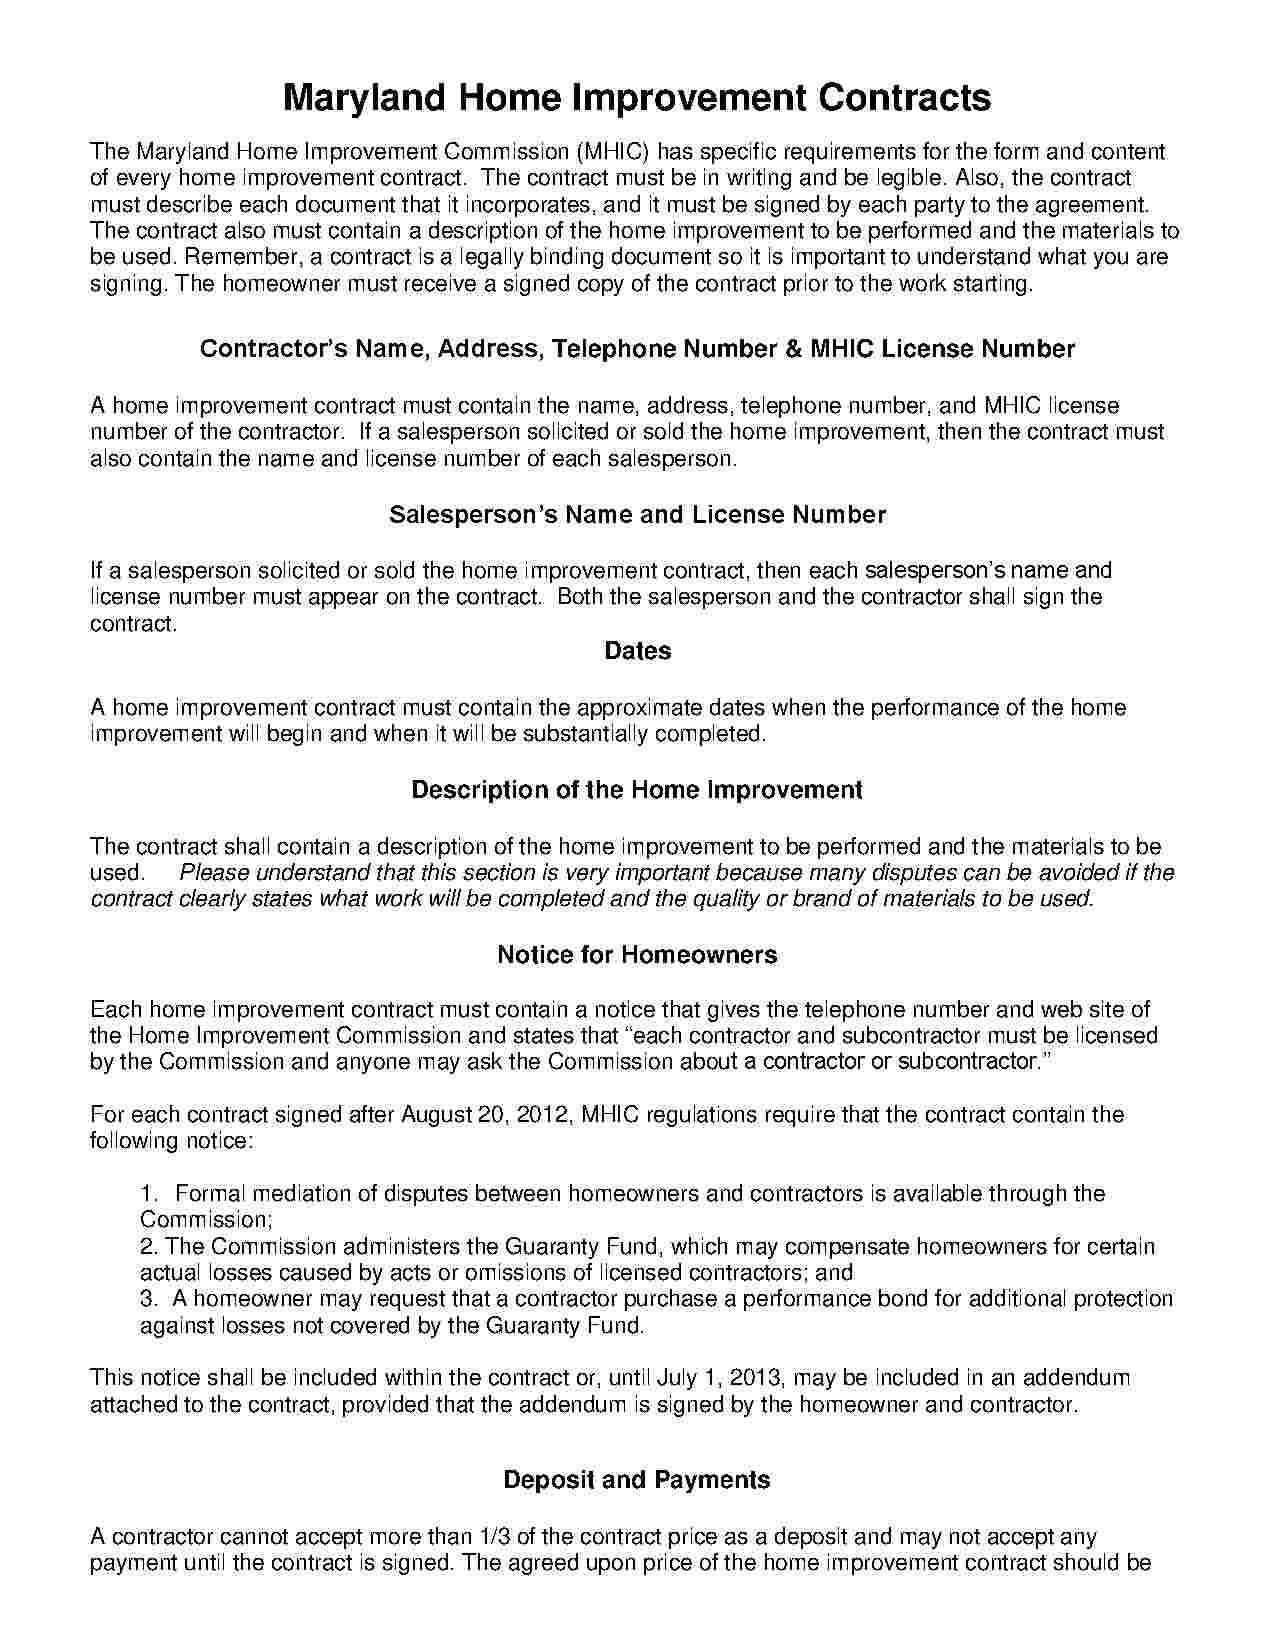 Download Home Improvement Contract Style 18 Template for